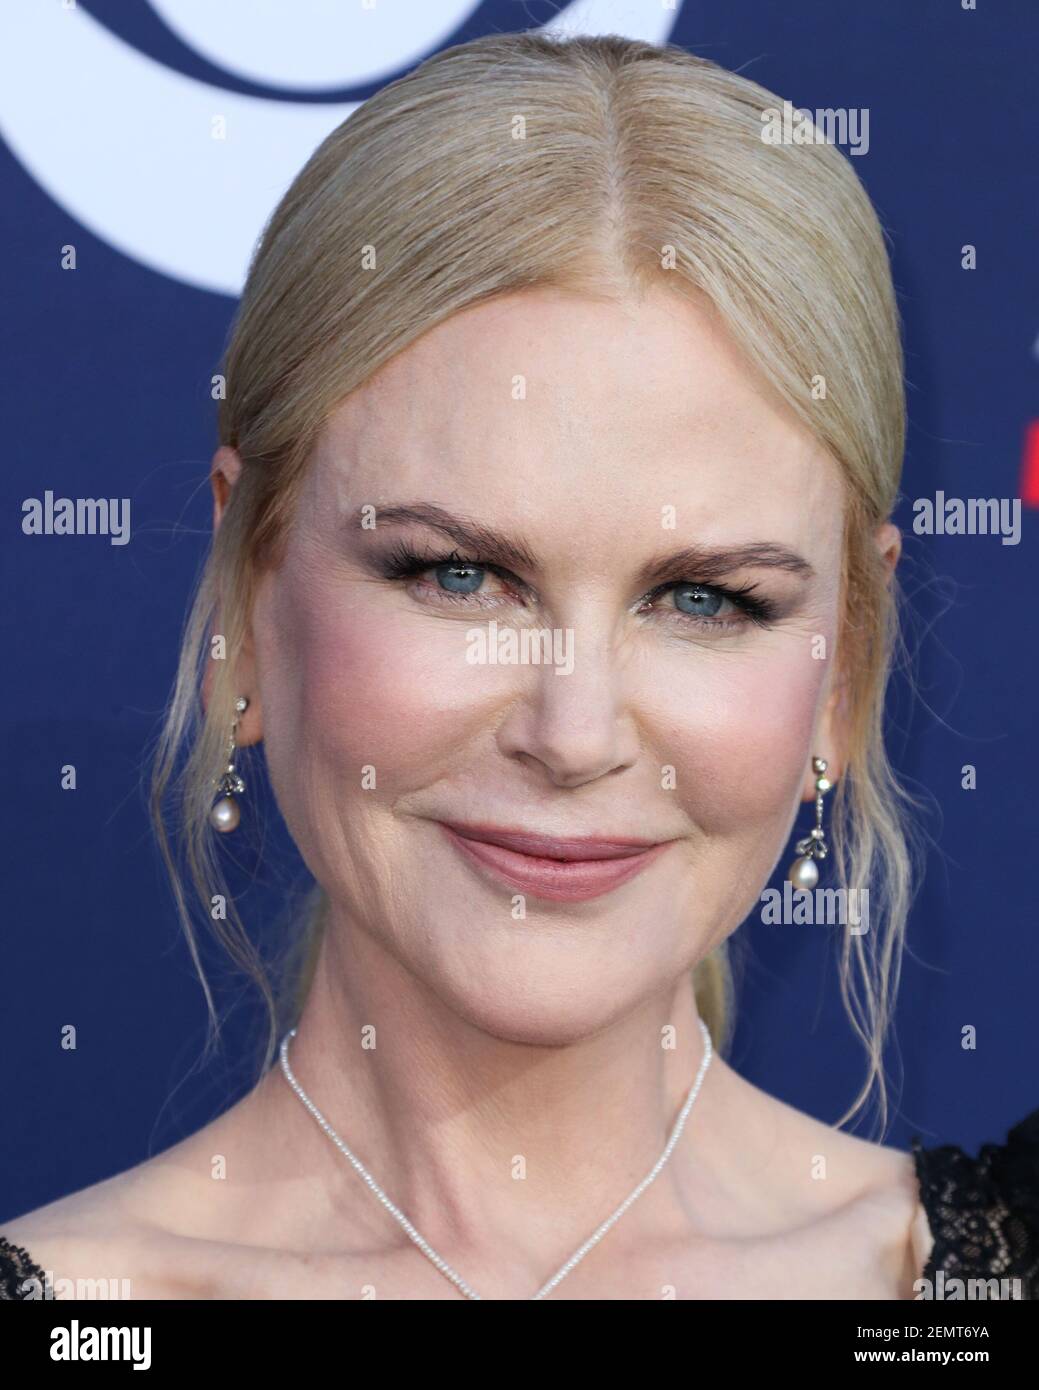 LAS VEGAS, NEVADA, USA - APRIL 07: Actress Nicole Kidman wearing a Christopher Kane dress, Alexandre Birman shoes, a Giuseppe Zanotti clutch, Turner & Tatler jewelry, and an Omega watch arrives at the 54th Academy Of Country Music Awards held at the MGM Grand Garden Arena on April 7, 2019 in Las Vegas, Nevada, United States. (Photo by Xavier Collin/Image Press Agency/Sipa USA) Stock Photo